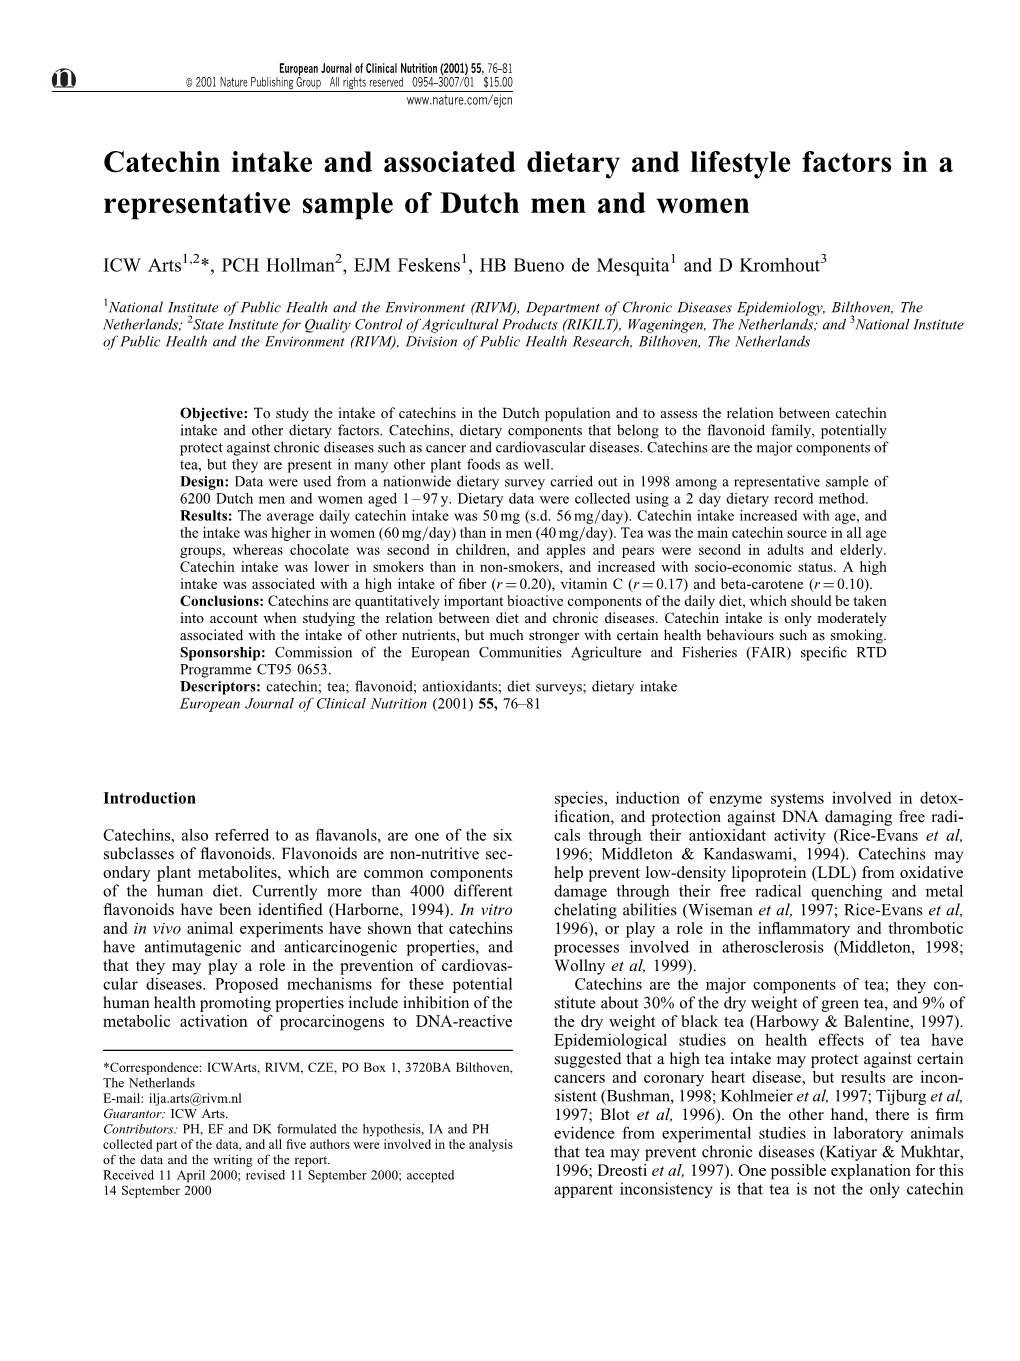 Catechin Intake and Associated Dietary and Lifestyle Factors in a Representative Sample of Dutch Men and Women